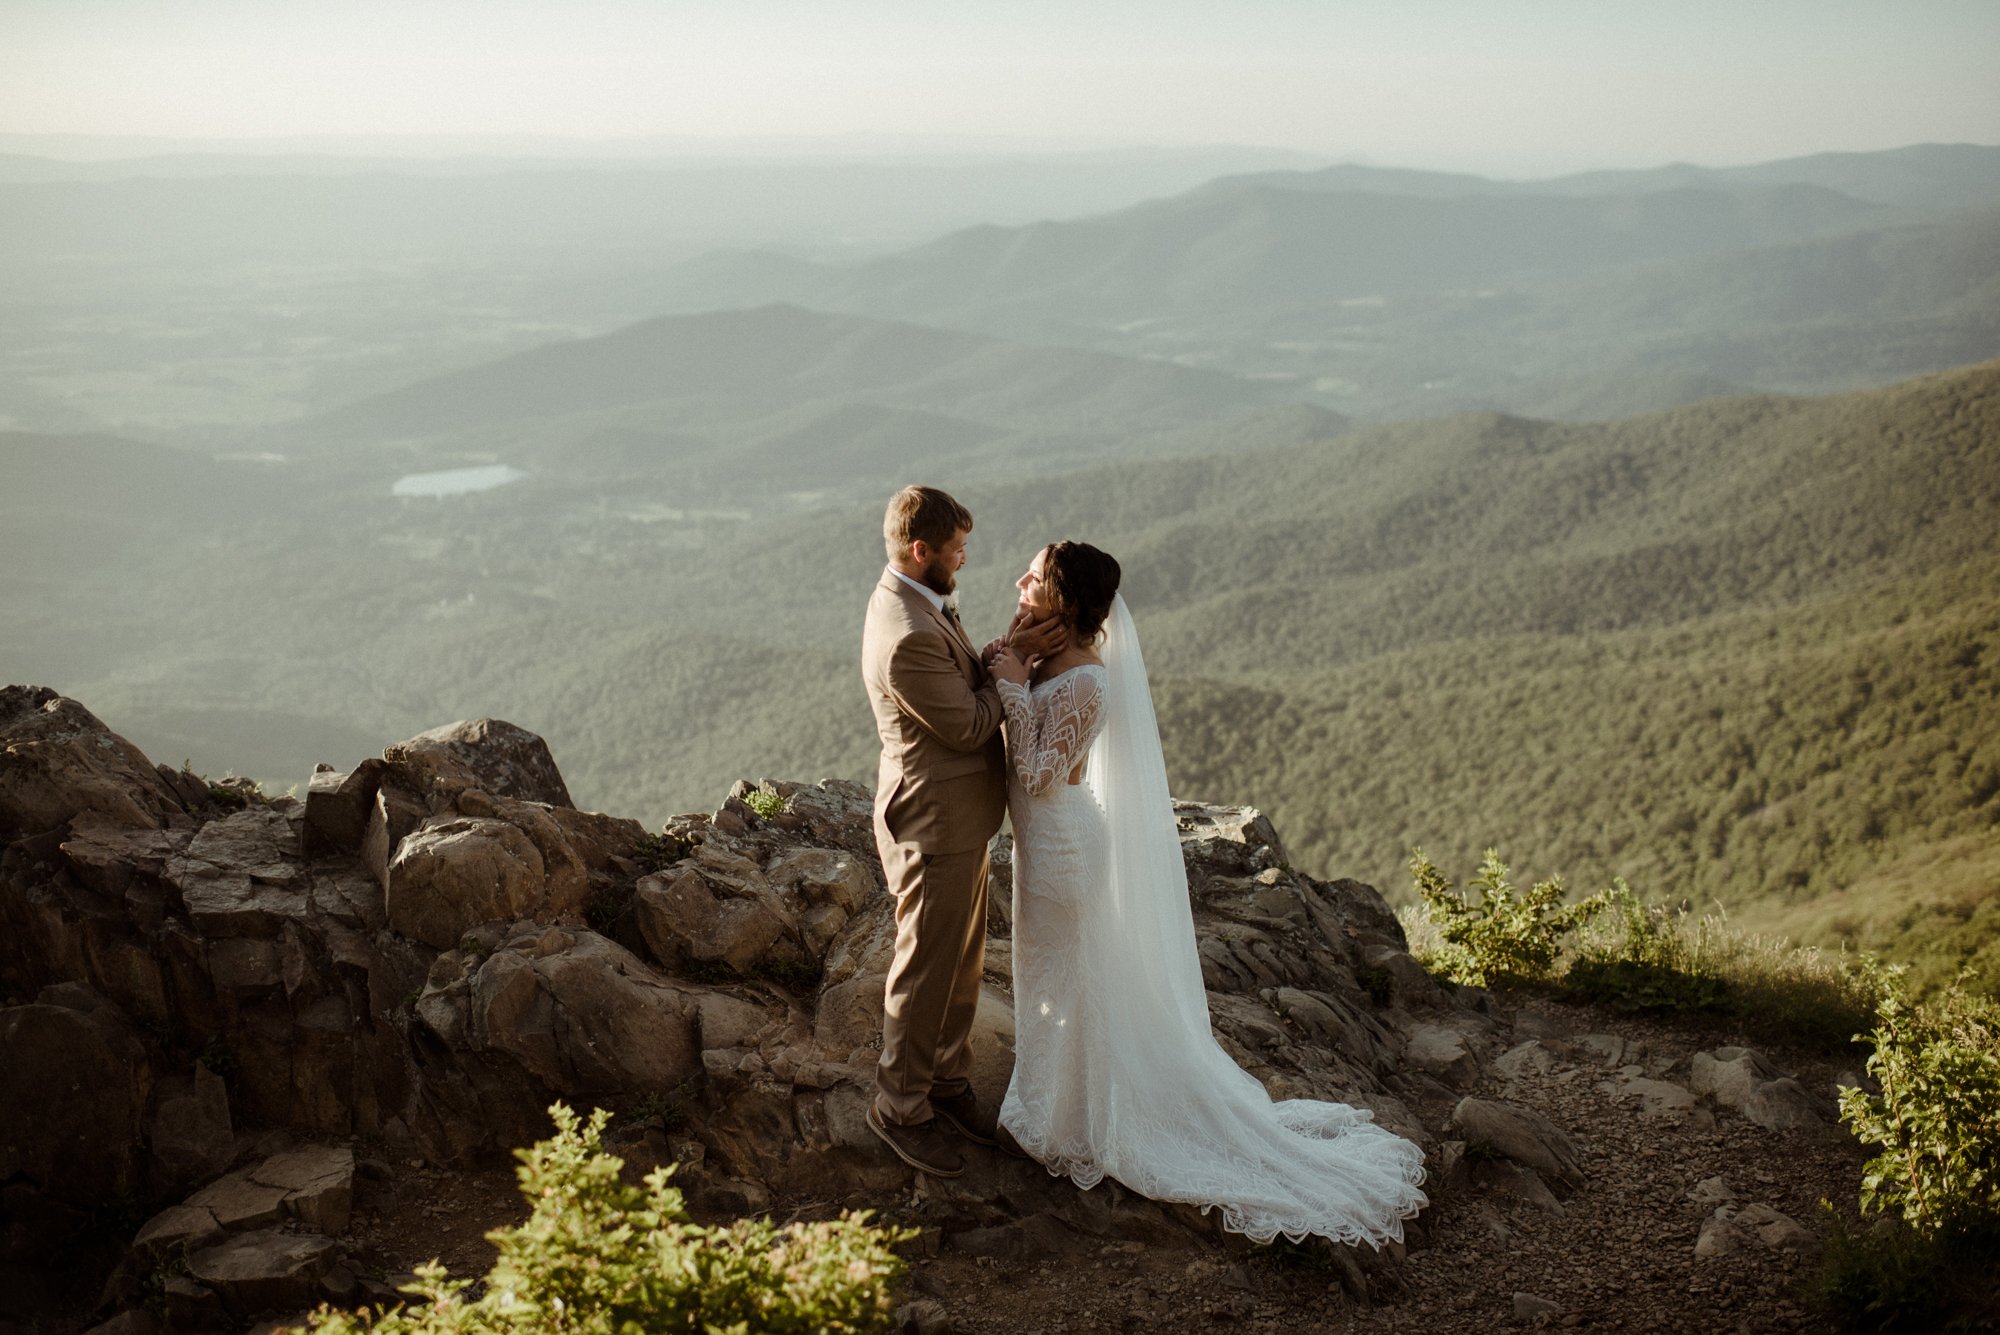 Sunset Elopement on Stony Man Summit in Shenandoah National Park - White Sails Creative Elopement Photography - July Elopement on the Blue Ridge Parkway_52.jpg